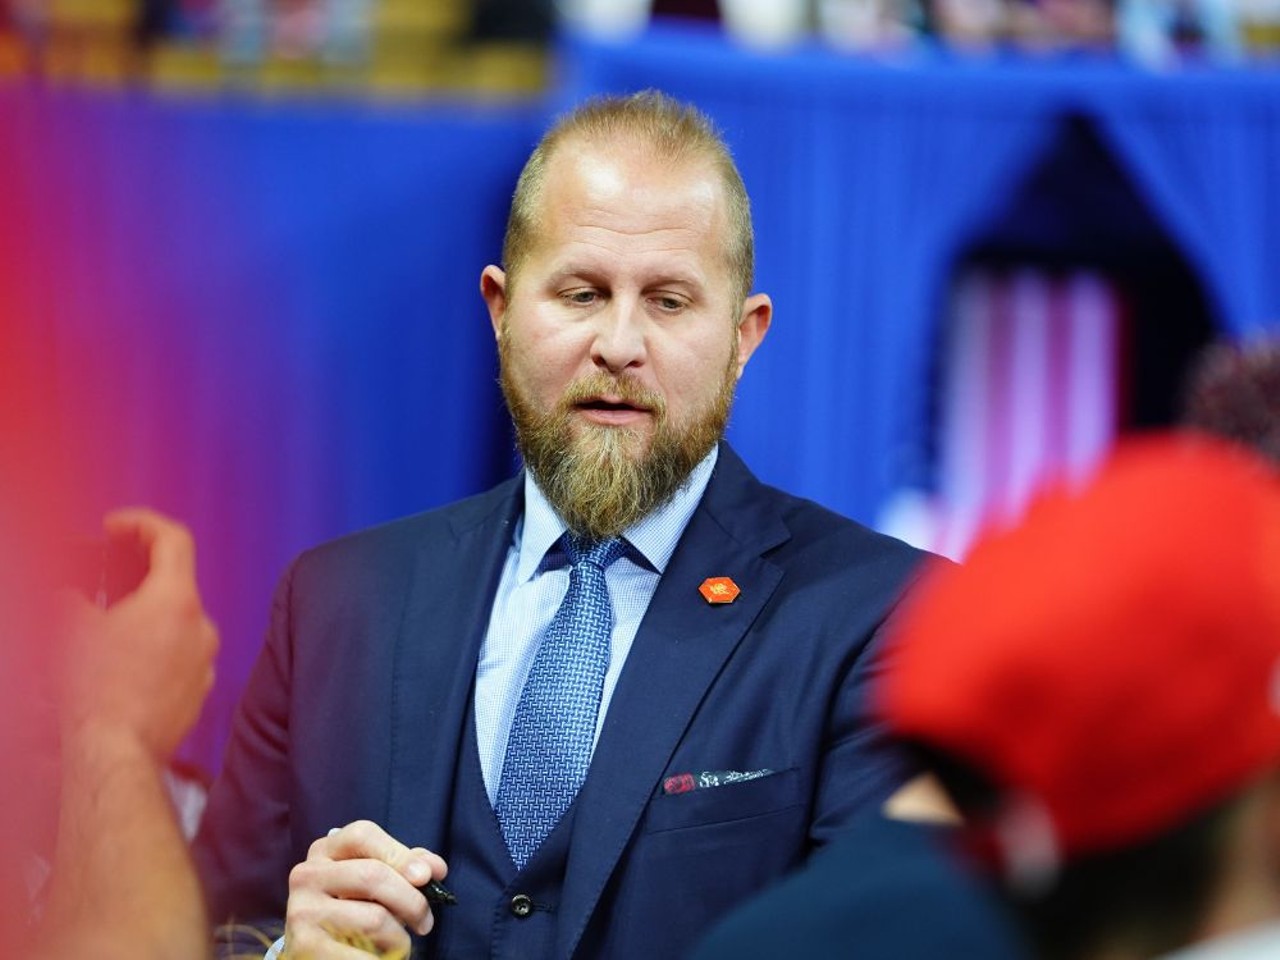 I sure wish Brad Parscale would move back to town.